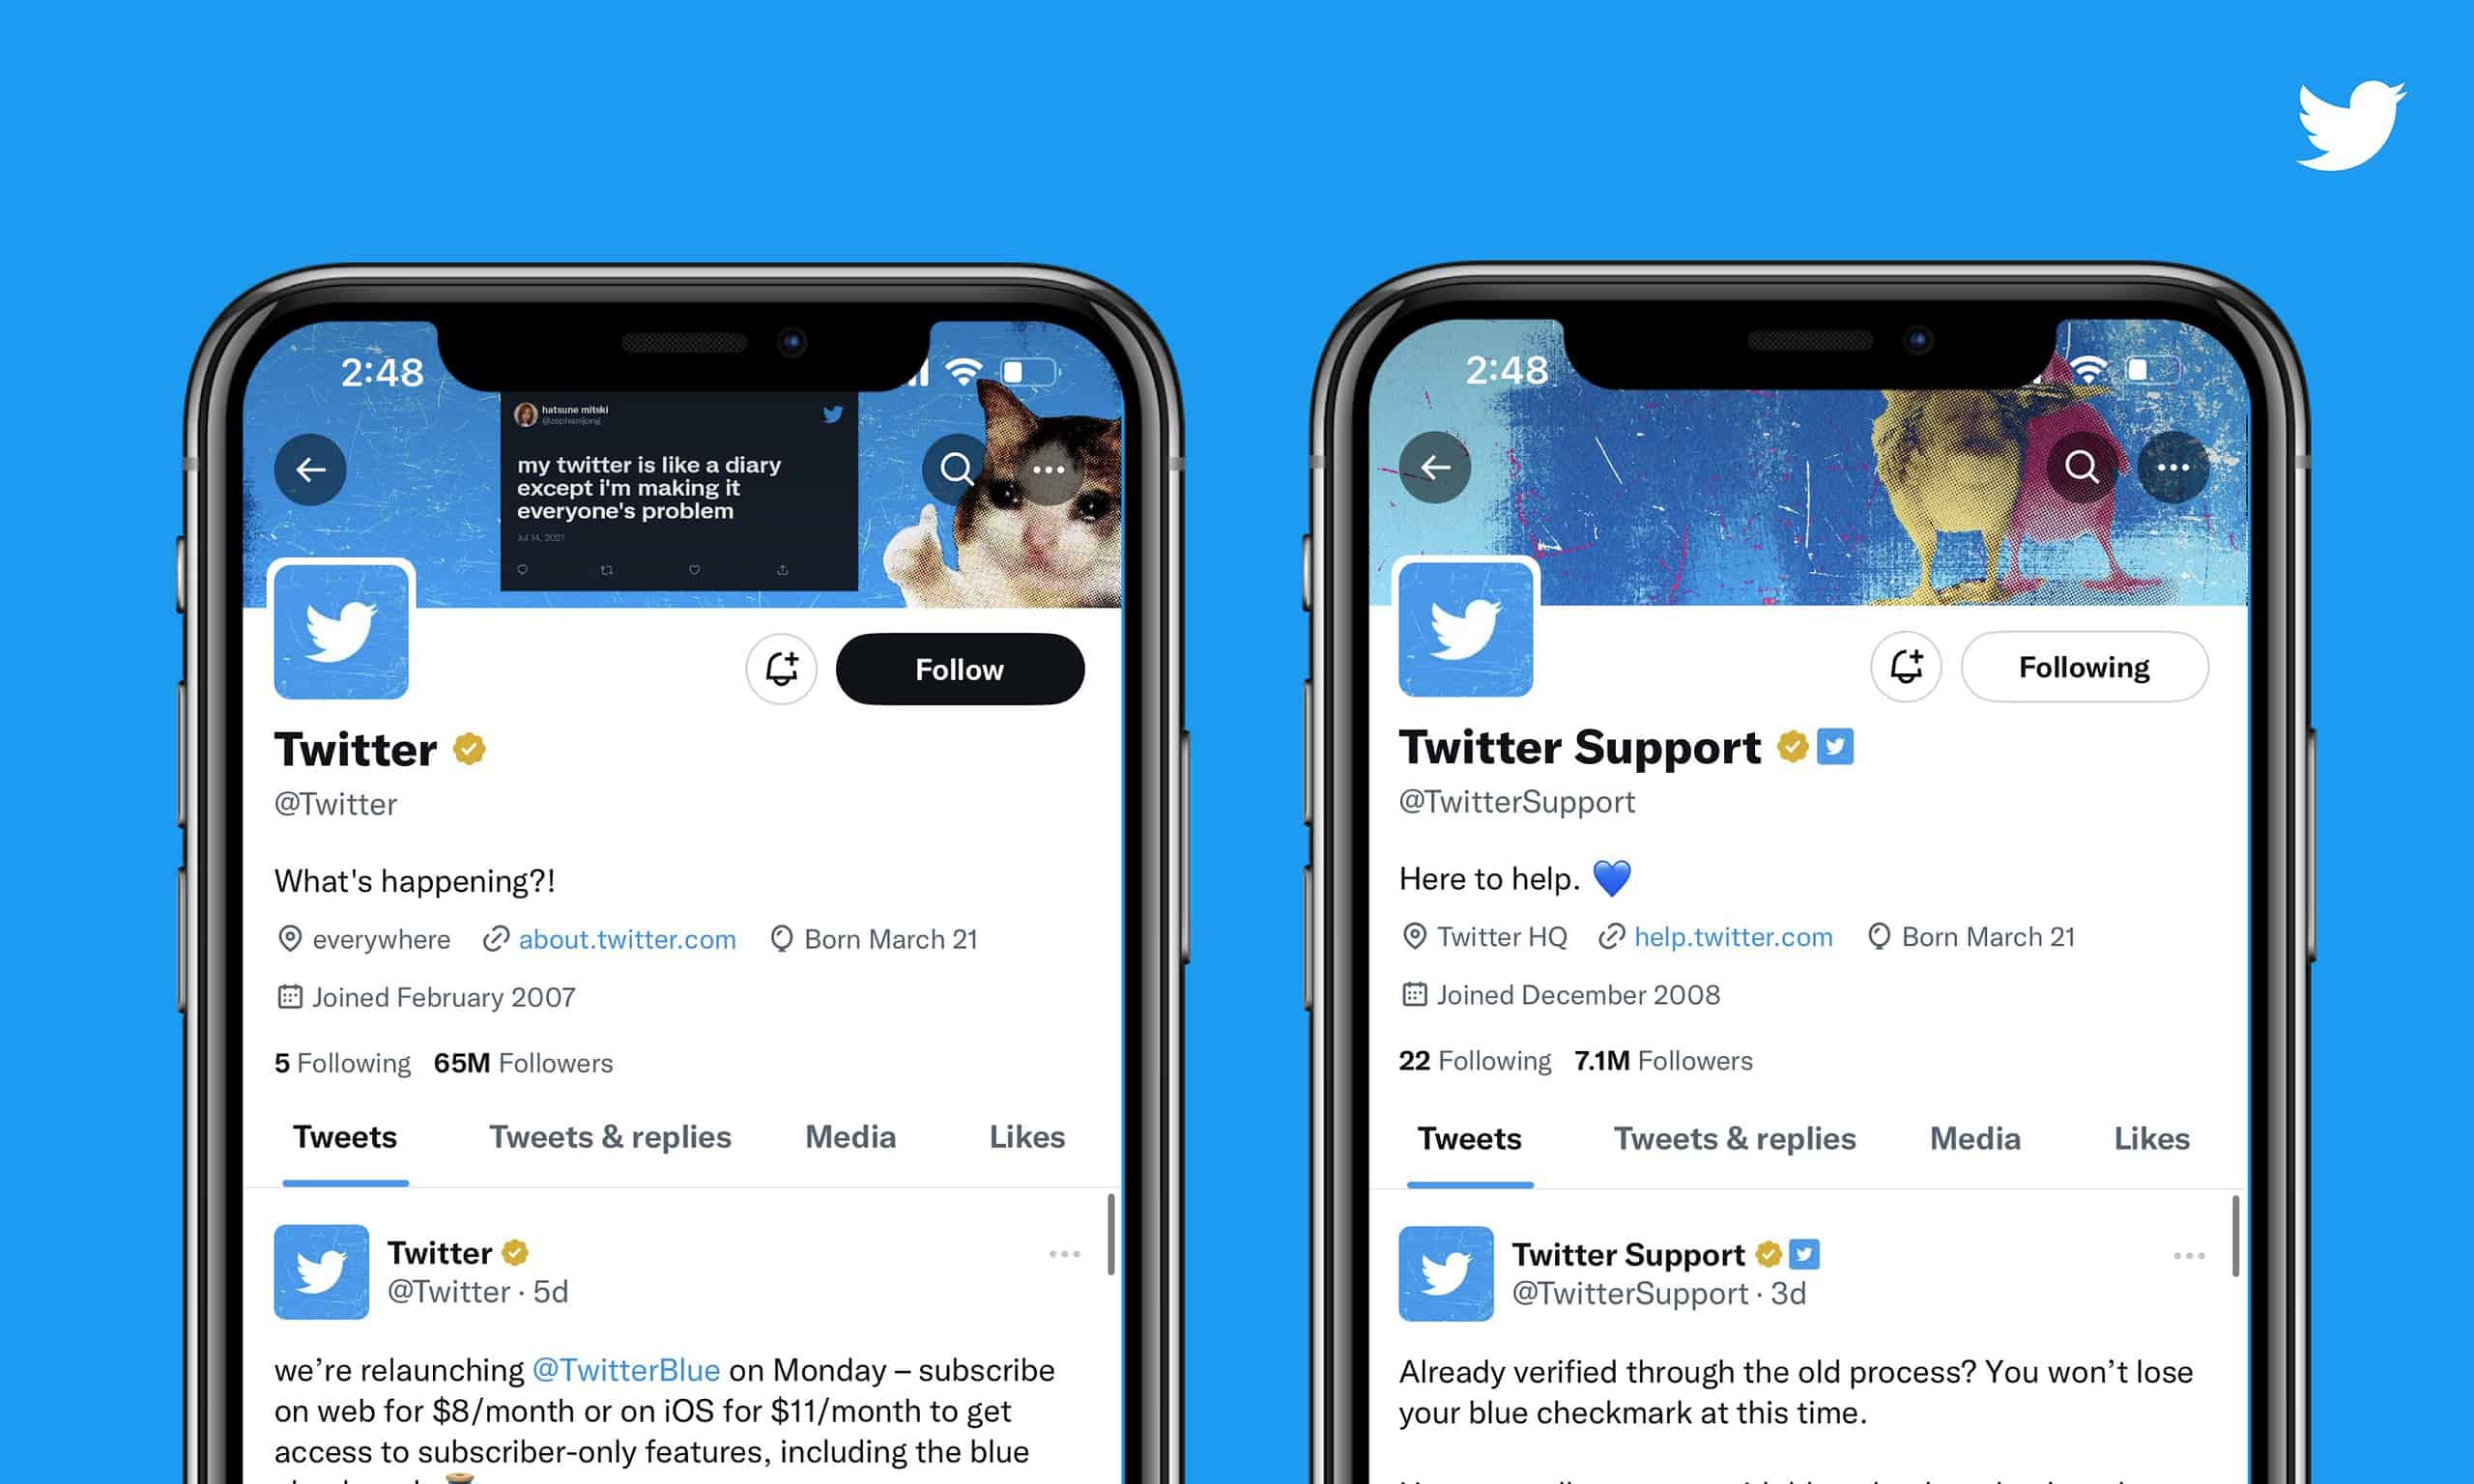 You may get a free Twitter Blue subscription in the future, here is how